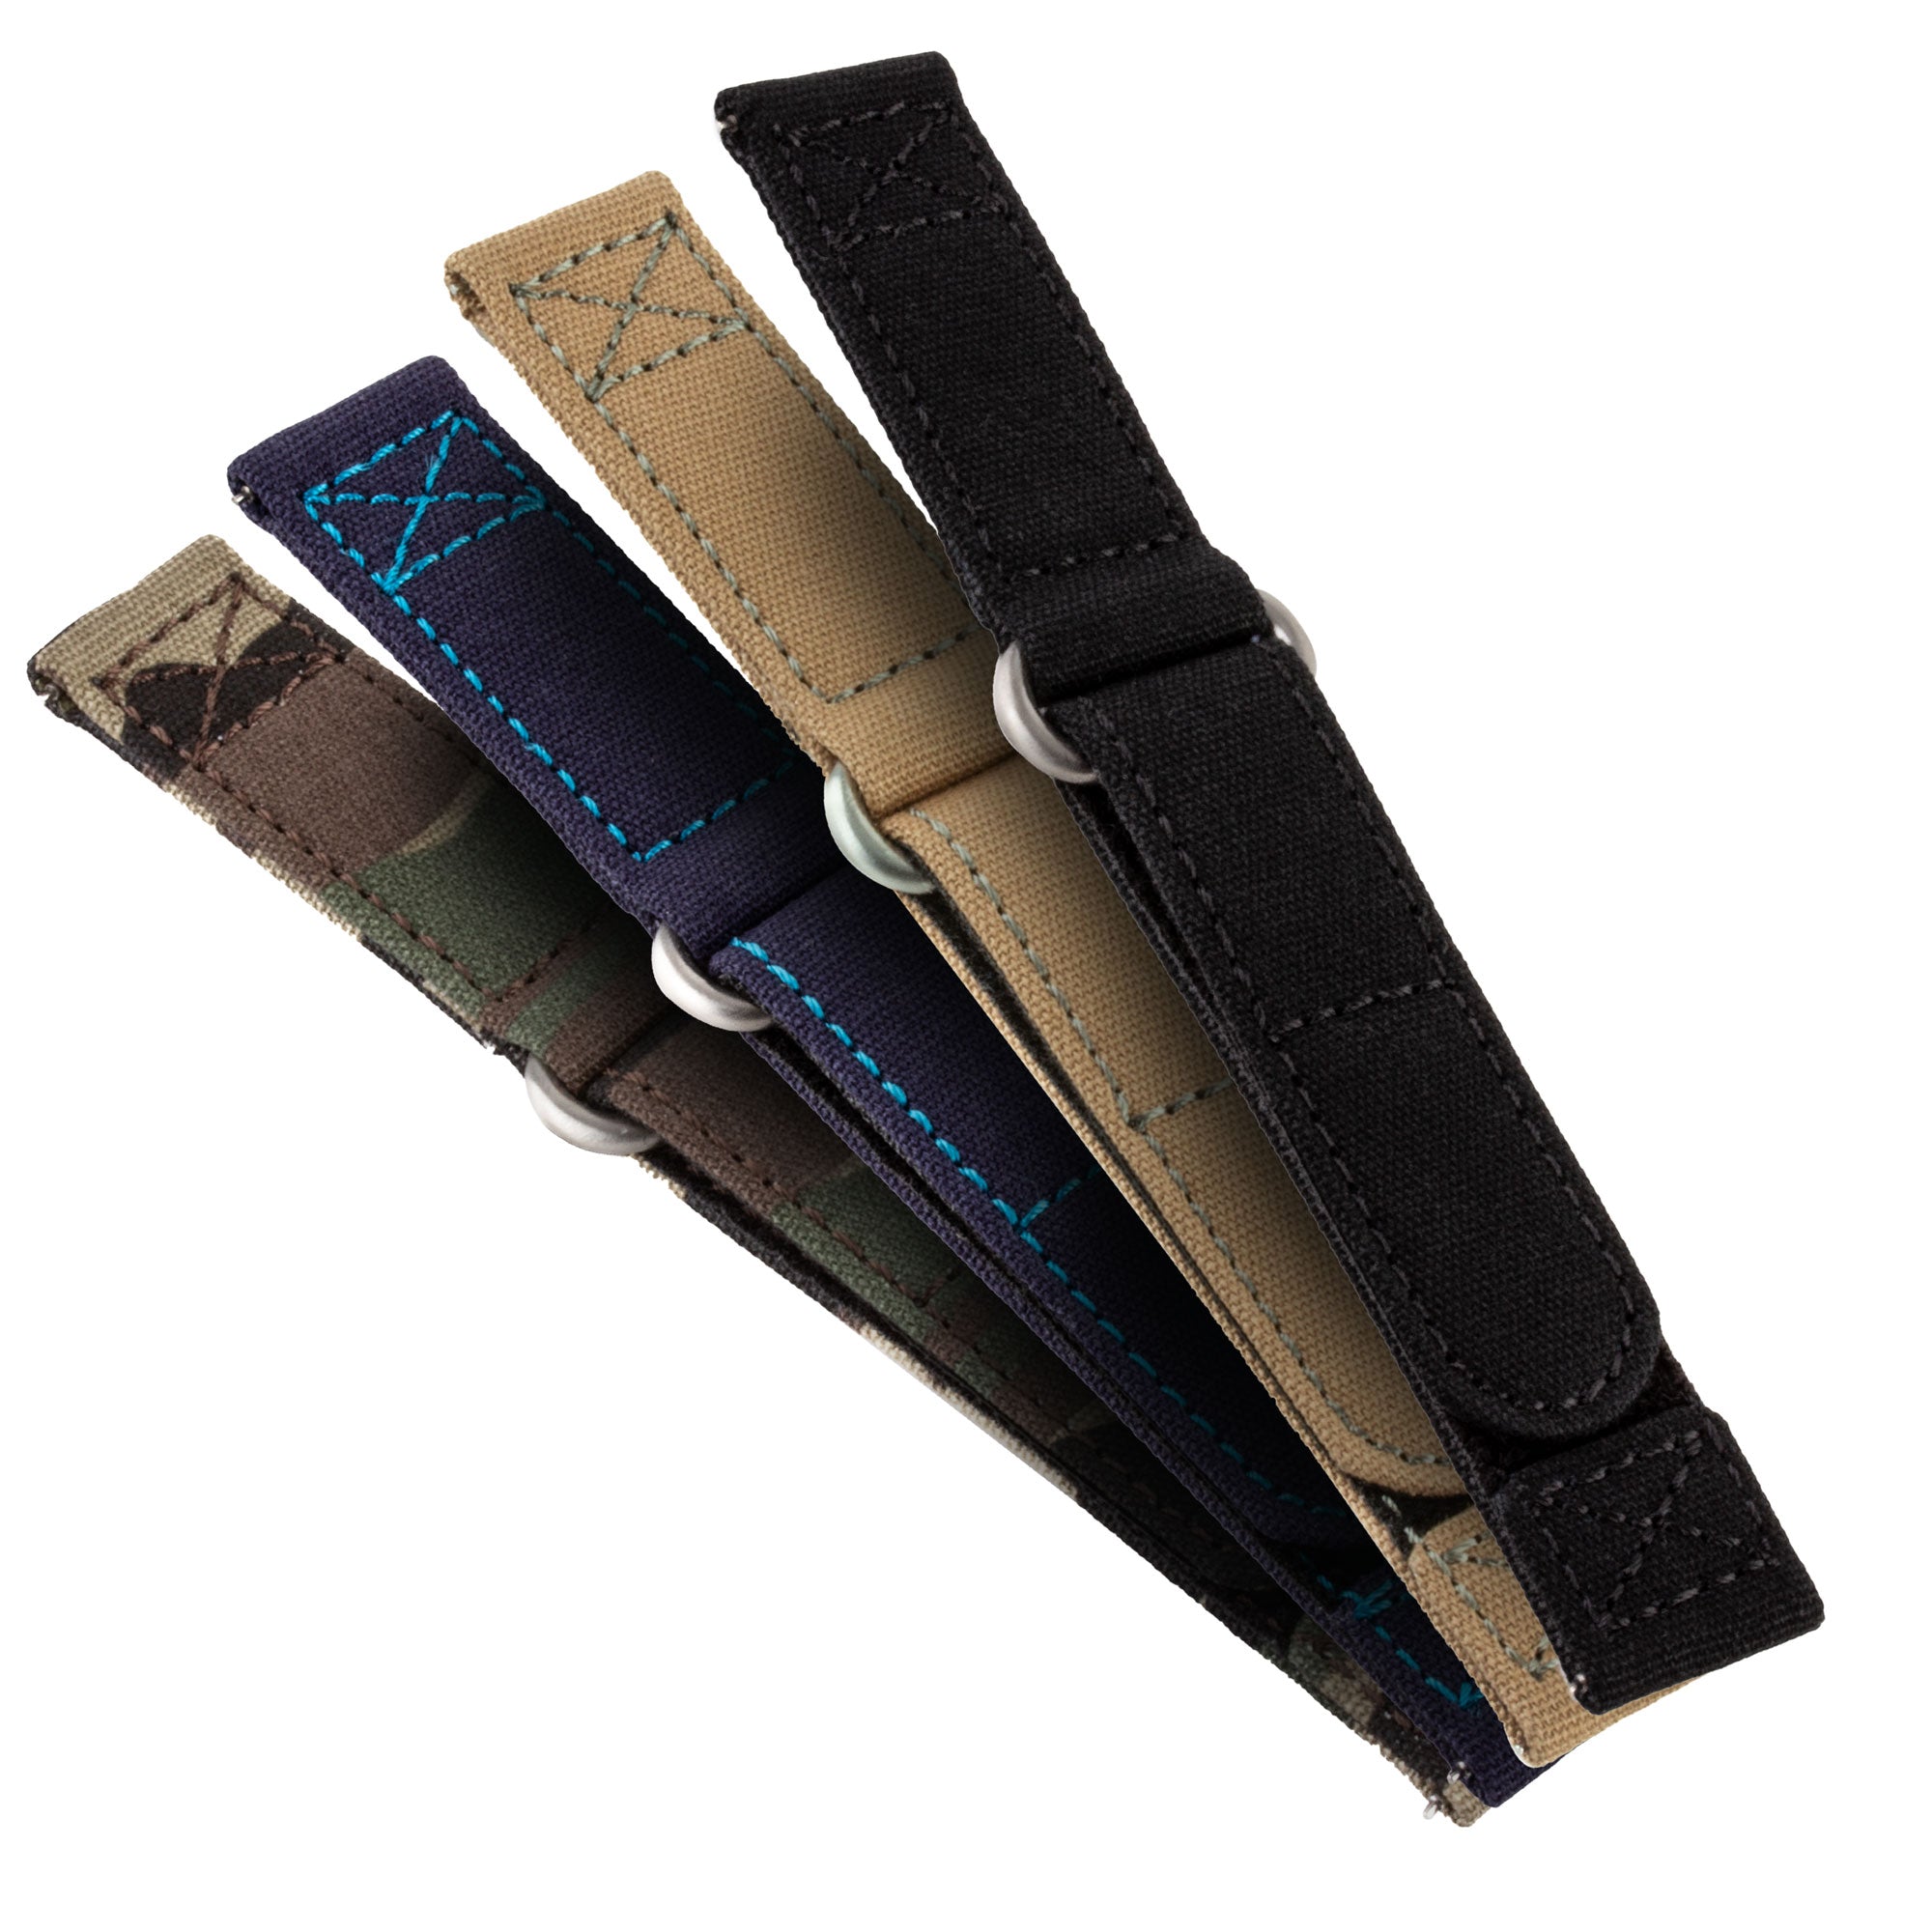 Louis Vuitton Straps for any watches (Panerai, Rolex, IWC, Omega